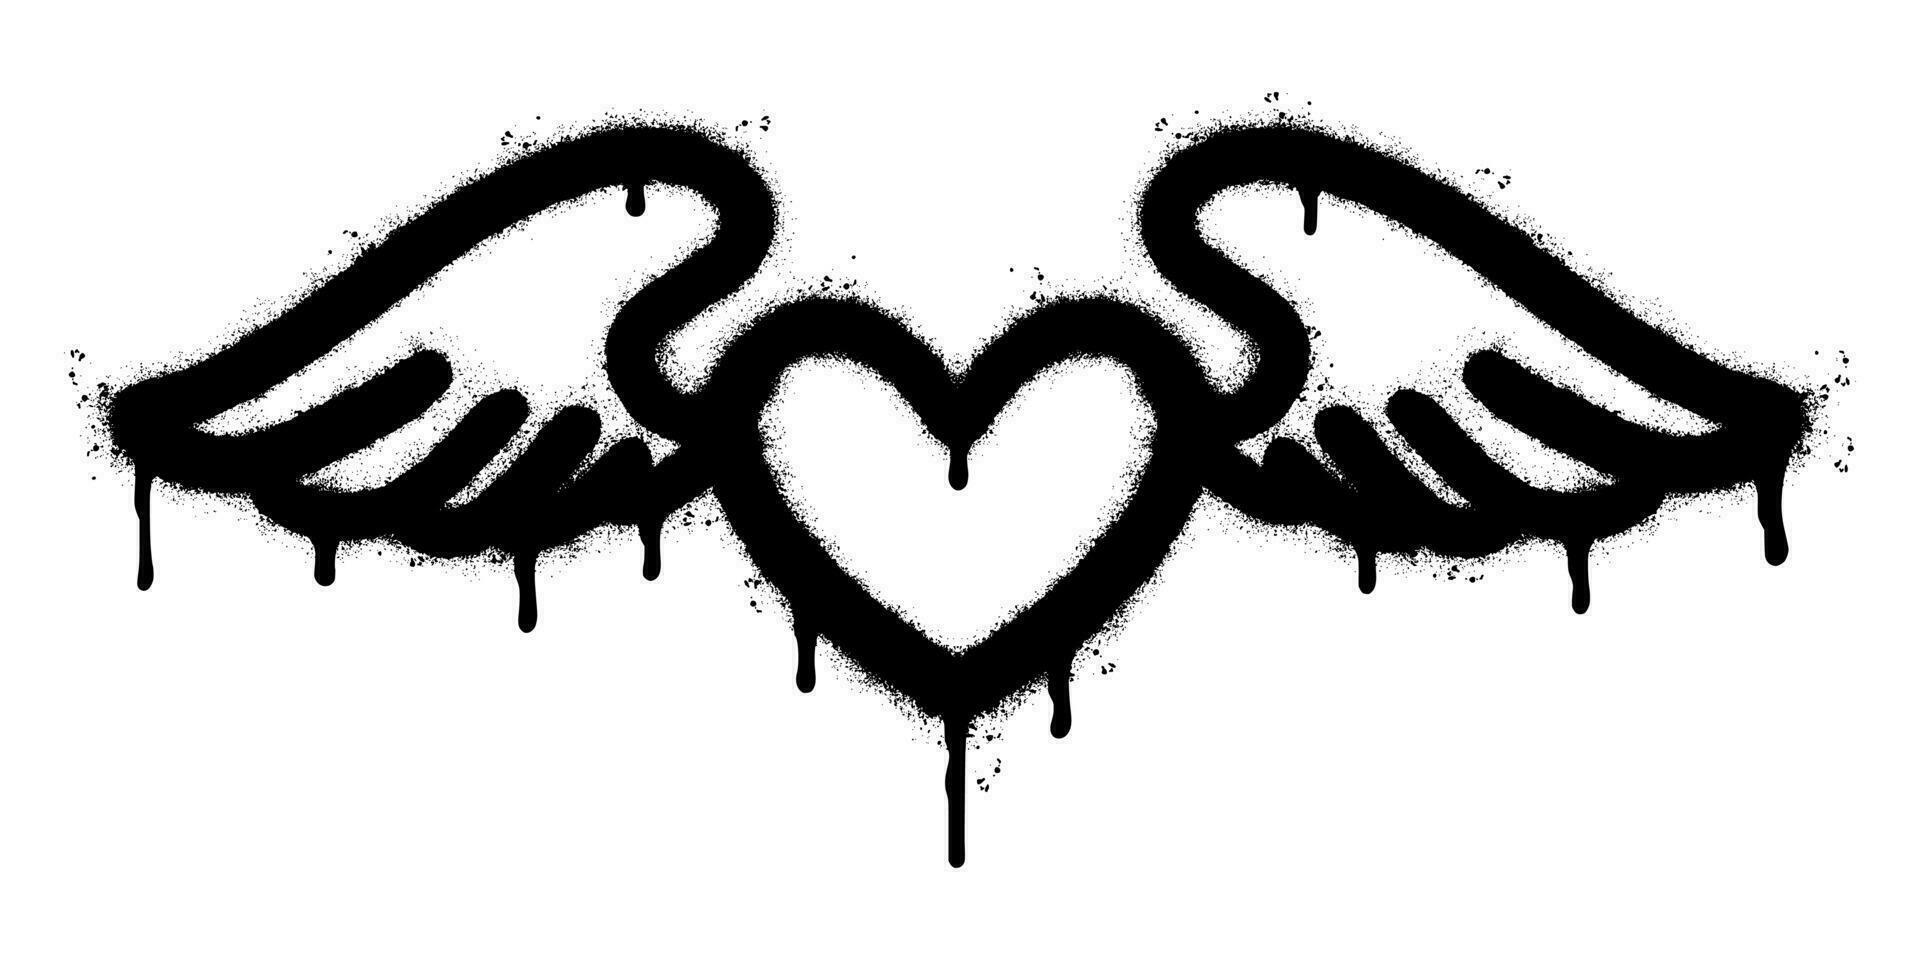 Spray Painted Graffiti heart wings icon Sprayed isolated with a white background. graffiti love wings  symbol with over spray in black over white. vector